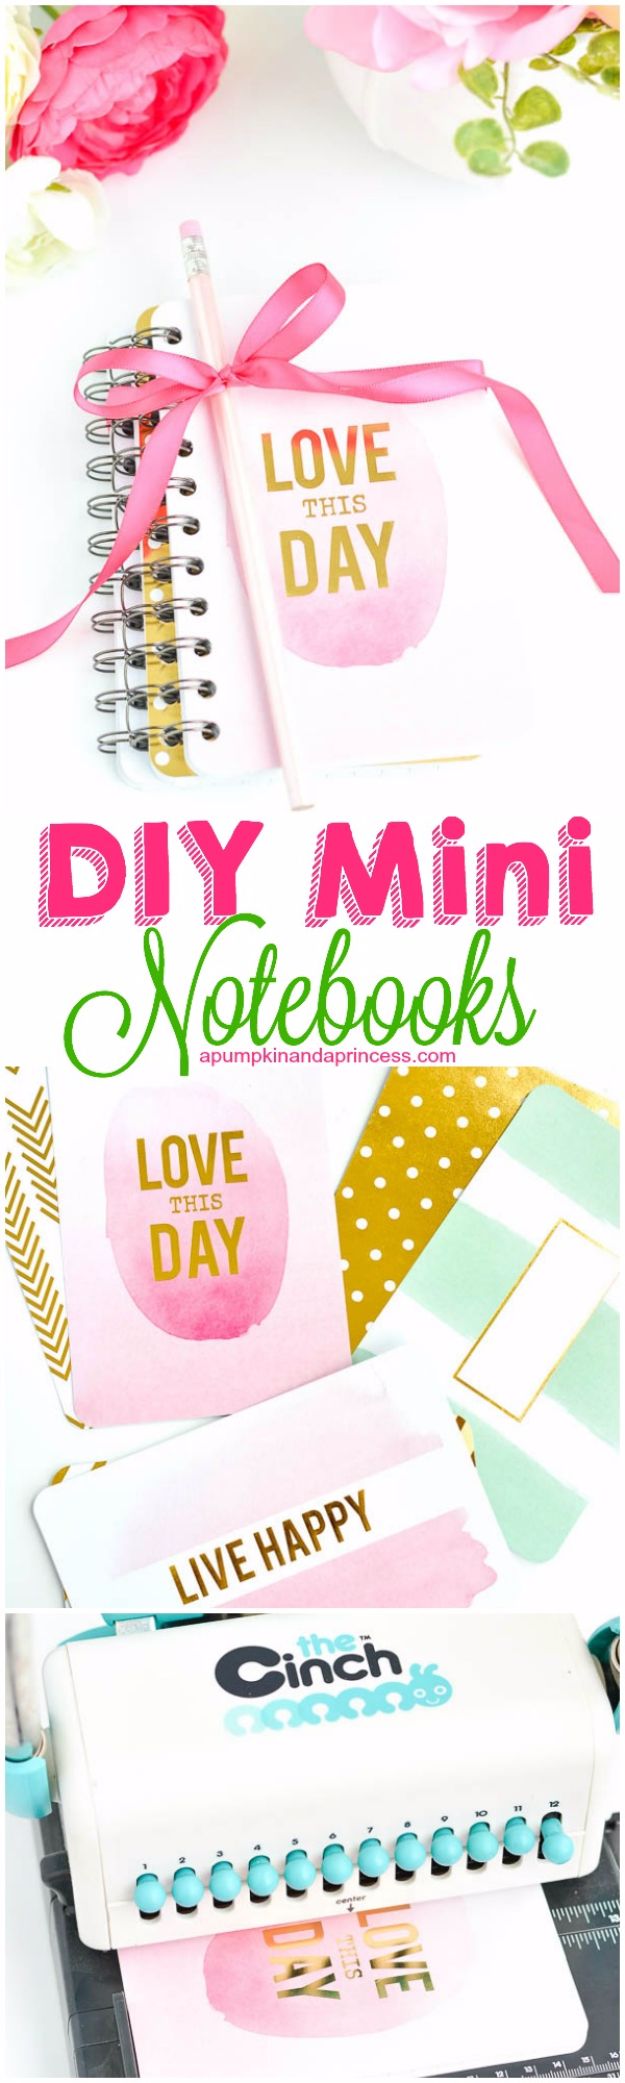 Cheap DIY Gifts and Inexpensive Homemade Christmas Gift Ideas for People on A Budget - DIY Mini Notebooks - To Make These Cool Presents Instead of Buying for the Holidays - Easy and Low Cost Gifts fTo Make For Friends and Neighbors - Quick Dollar Store Crafts and Projects for Xmas Gift Giving Parties - Step by Step Tutorials and Instructions #diygifts #teencrafts #diyideas #crafts #christmasgifts #cheapgifts